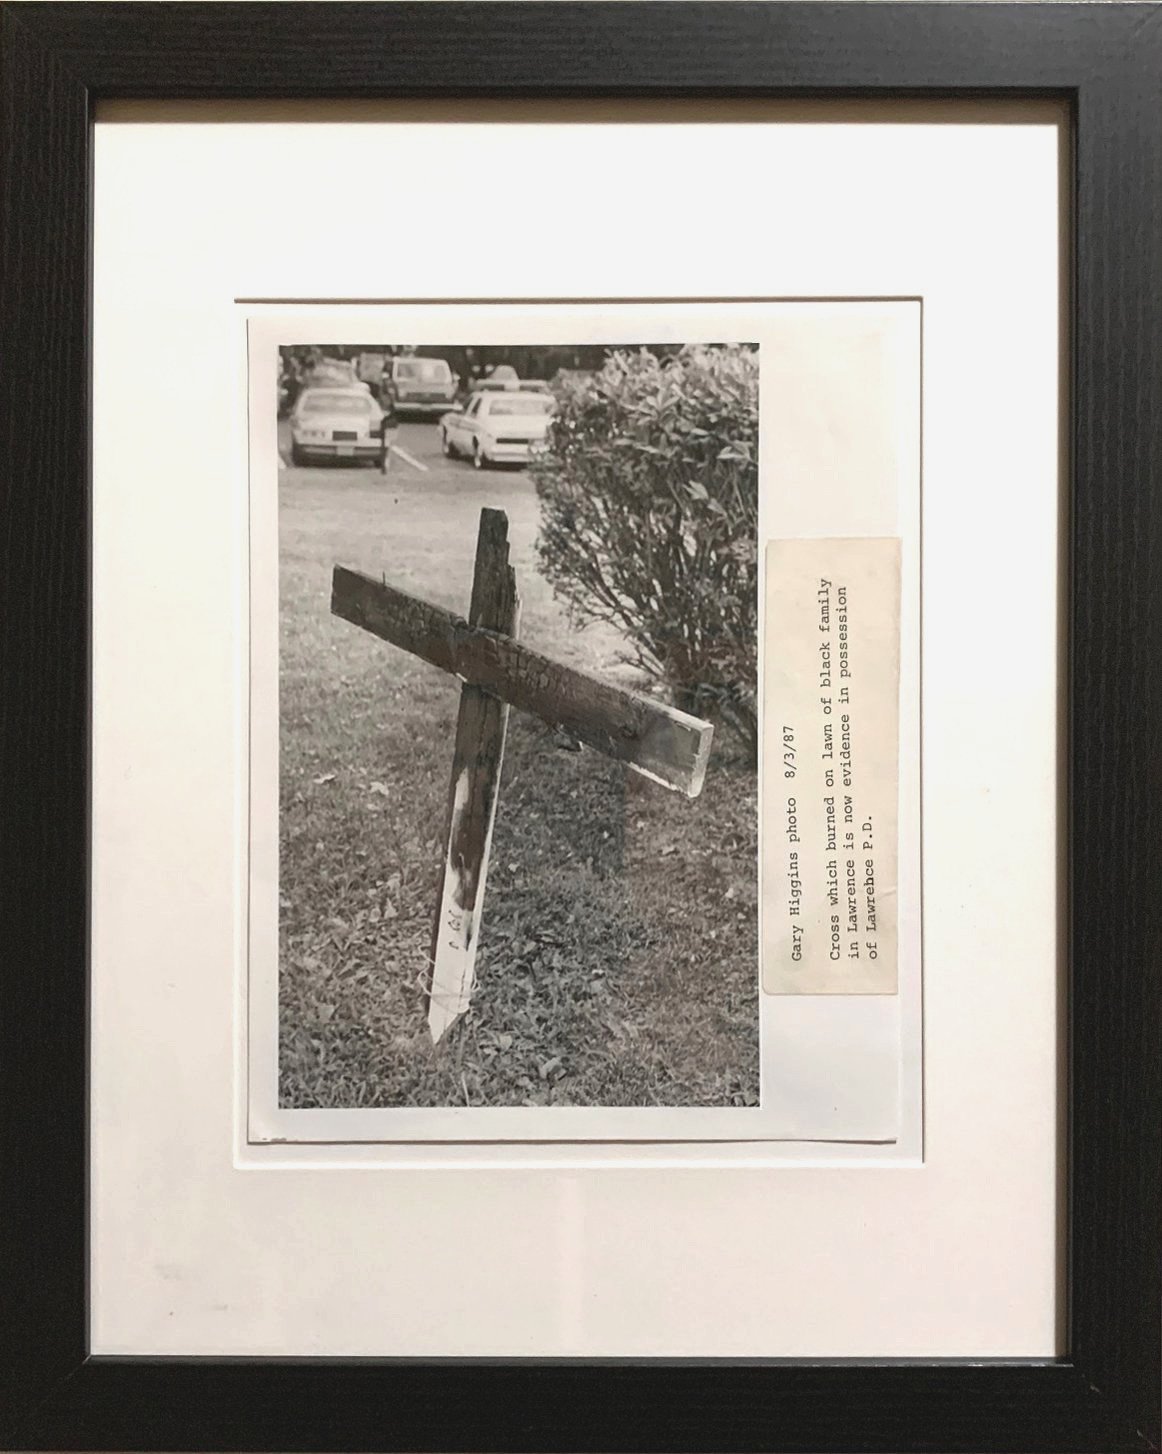 1. 8/3/87 - Cross which burned on lawn of black family in Lawrence is now evidence in possession of Lawrence P.D., Lawrence, Kansas